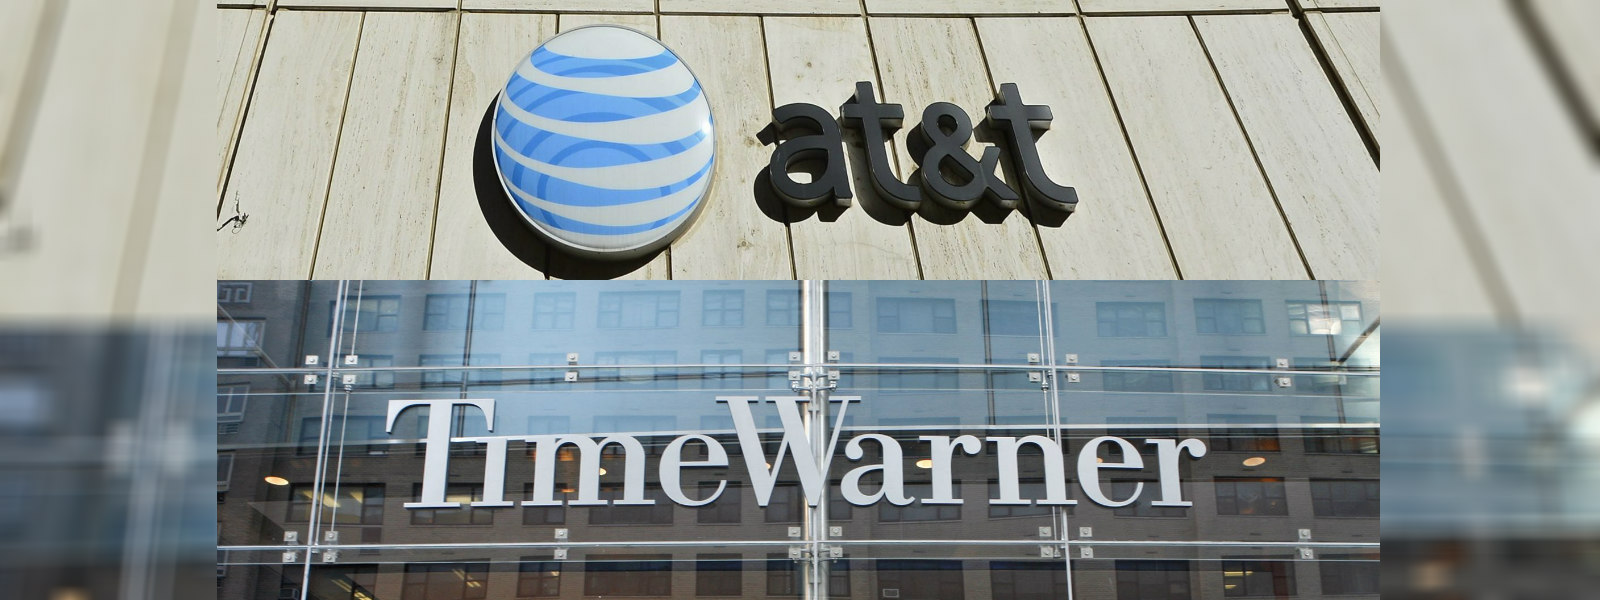 AT&T takeover of Time Warner approved by judge